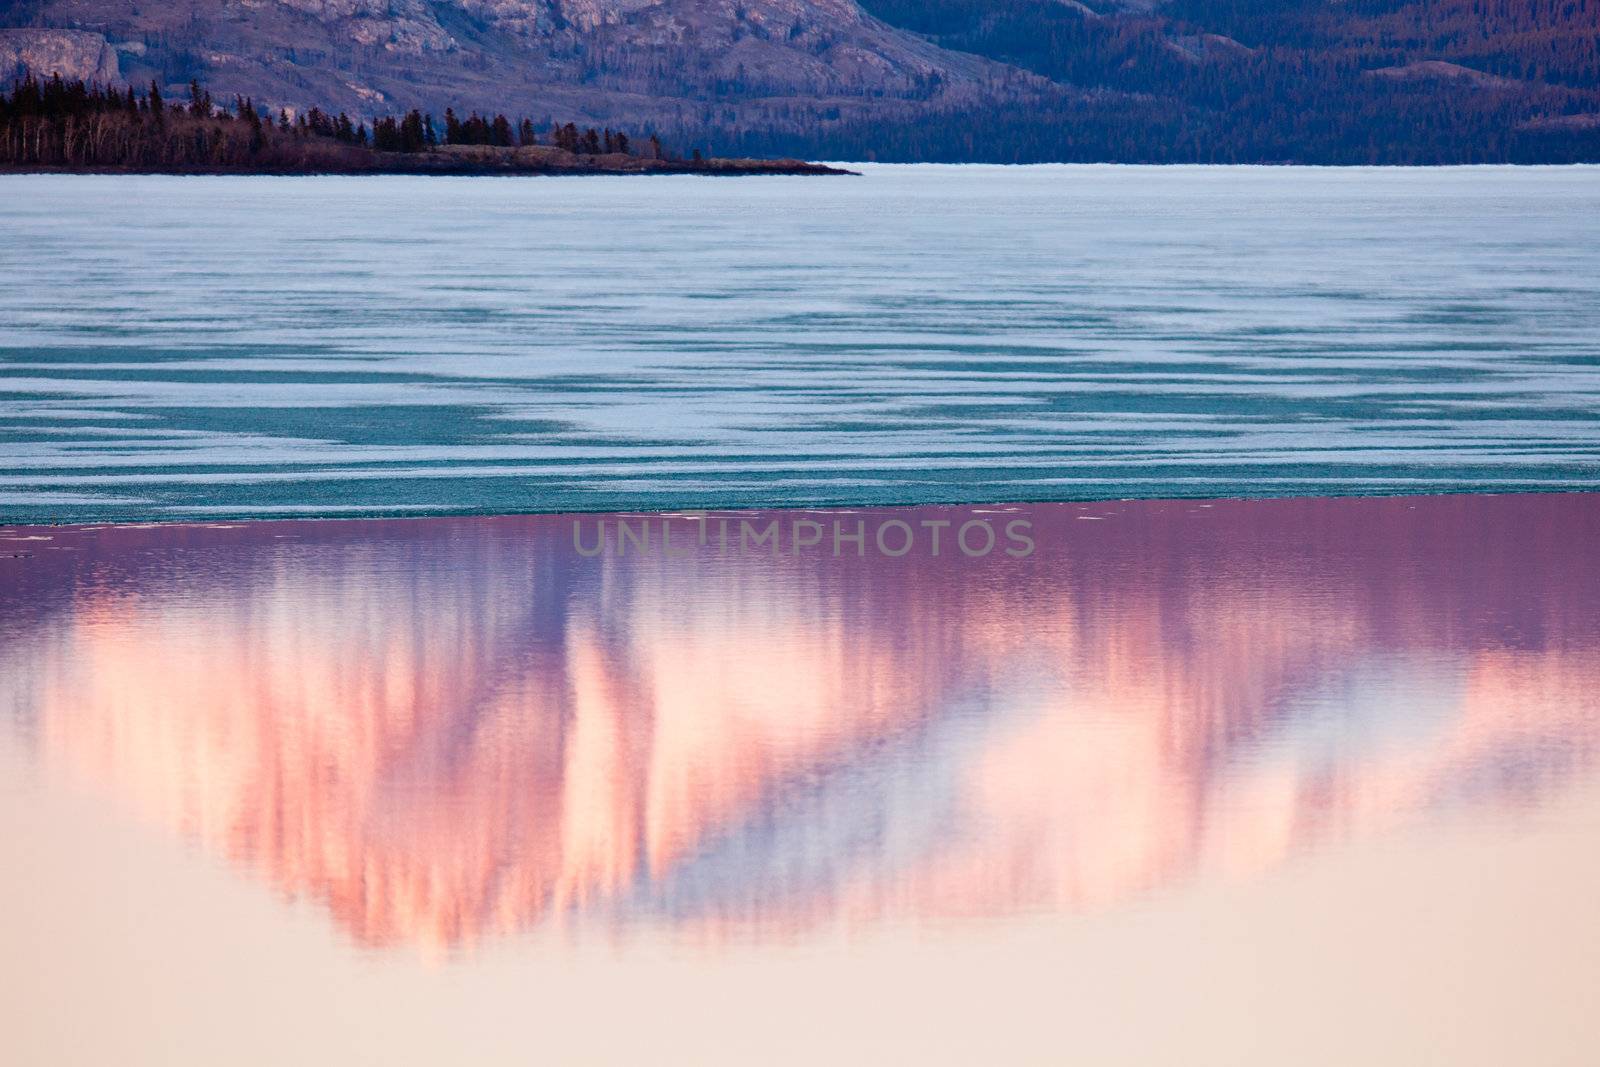 The evening before ice-break at Lake Laberge, Yukon Territory, Canada: reflection of snow-covered Mt. Laurier on calm open water surface of still largely ice-covered lake.